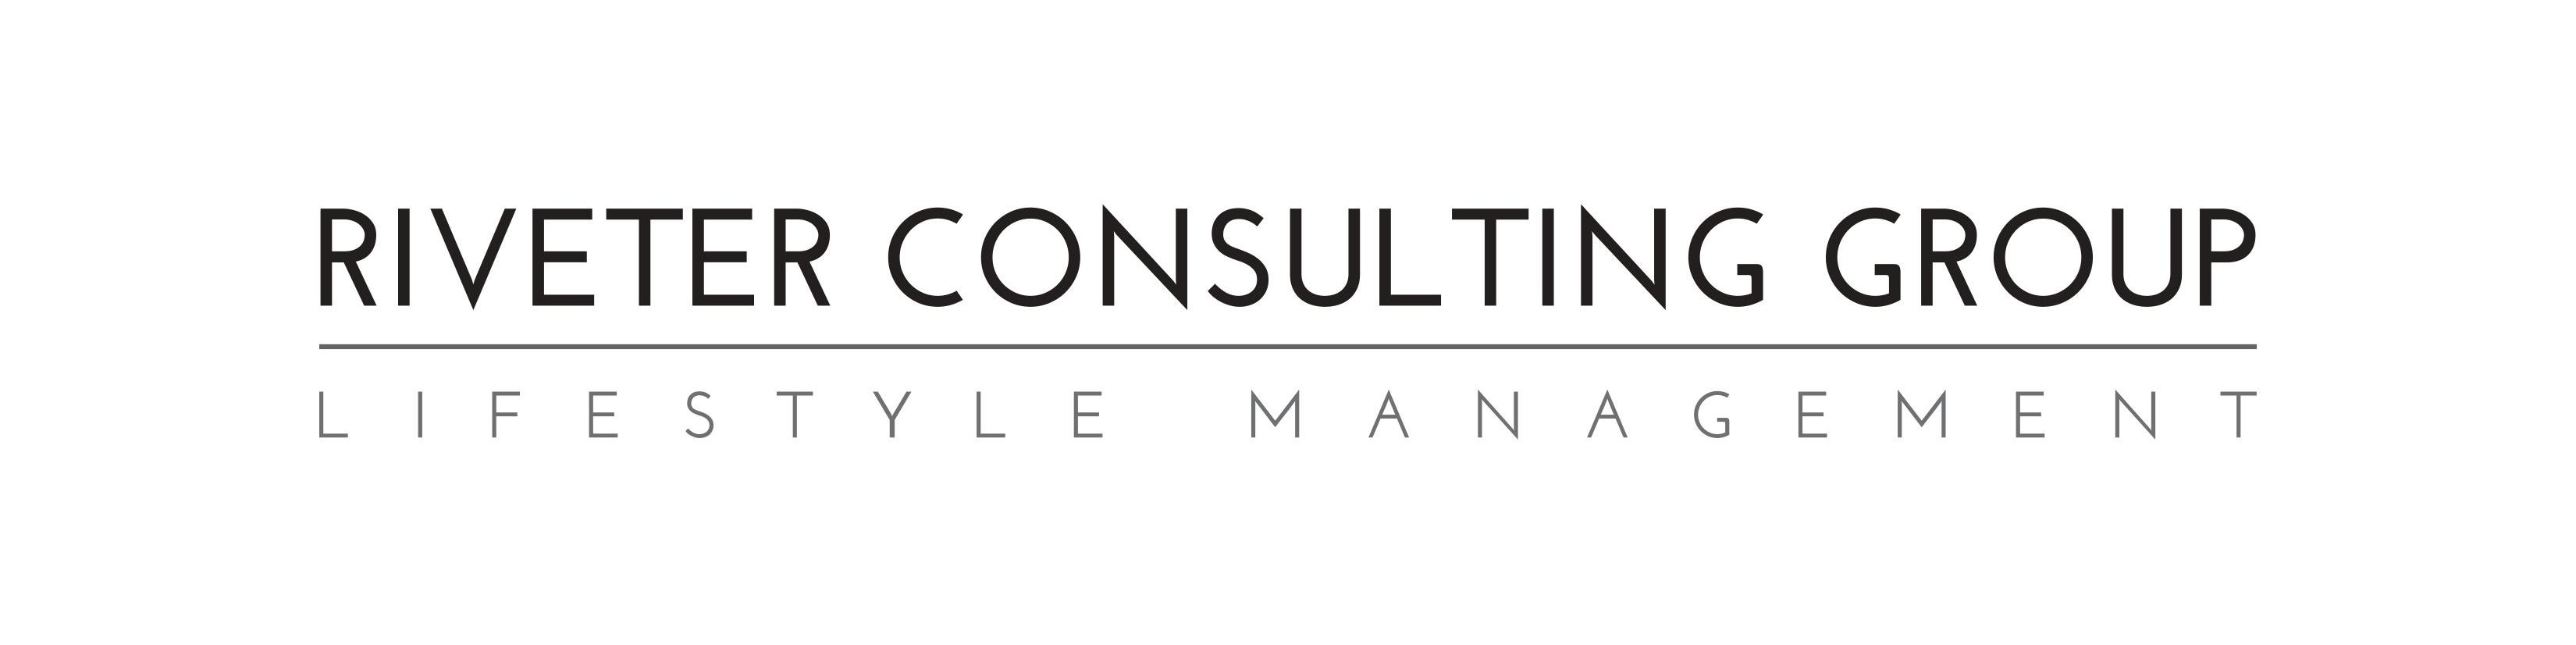 Riveter Consulting Group